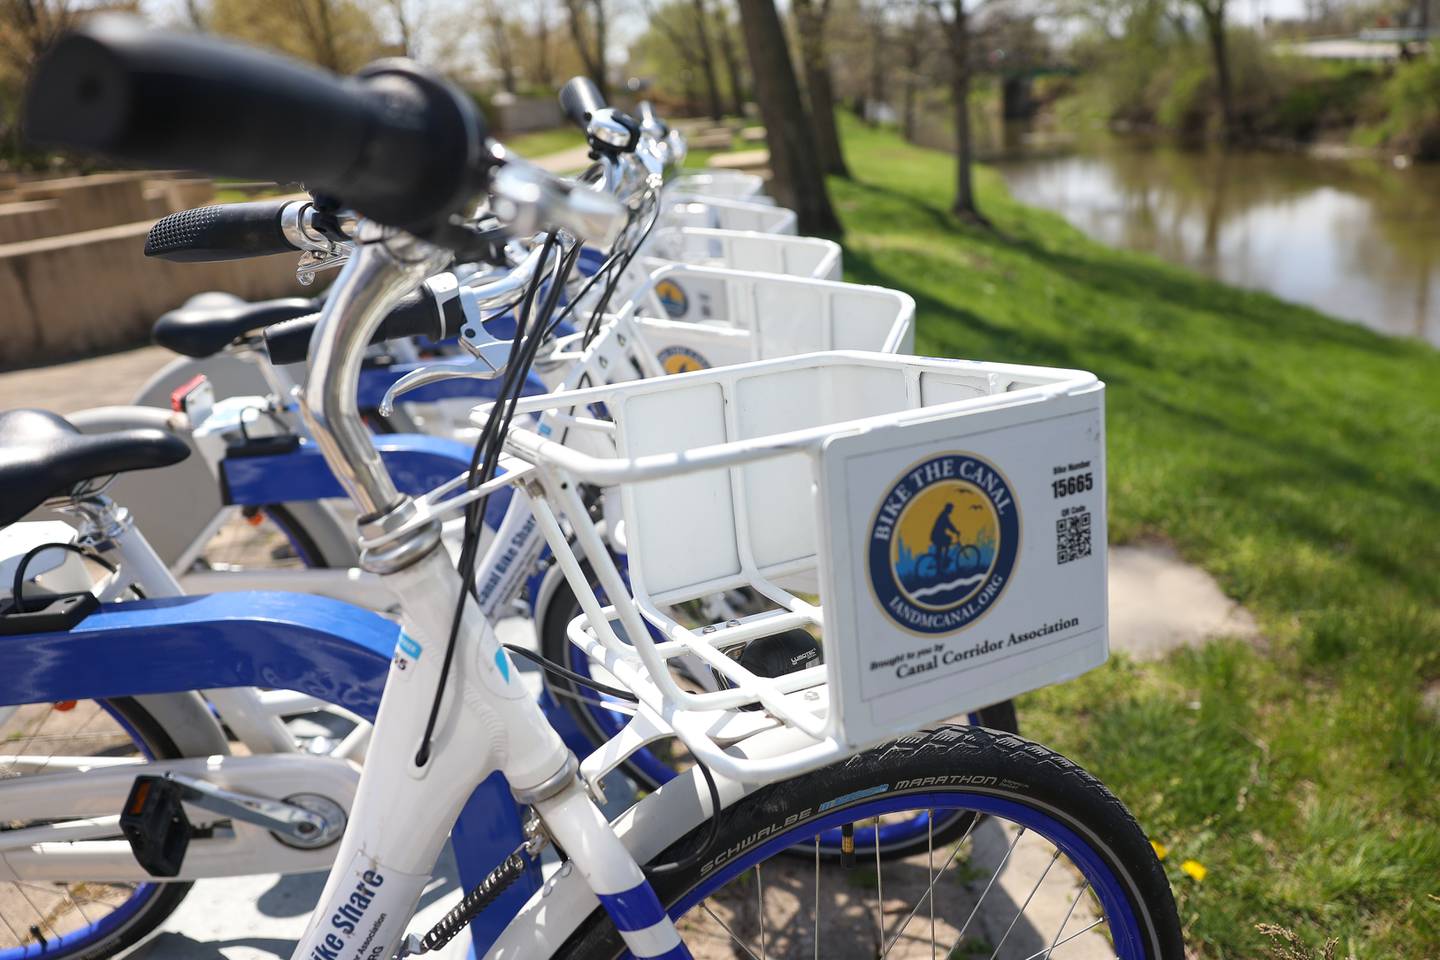 Rental bikes sit along the canal at Lockport’s Lincoln Landing on Wednesday, April 19, 2023 in Lockport.